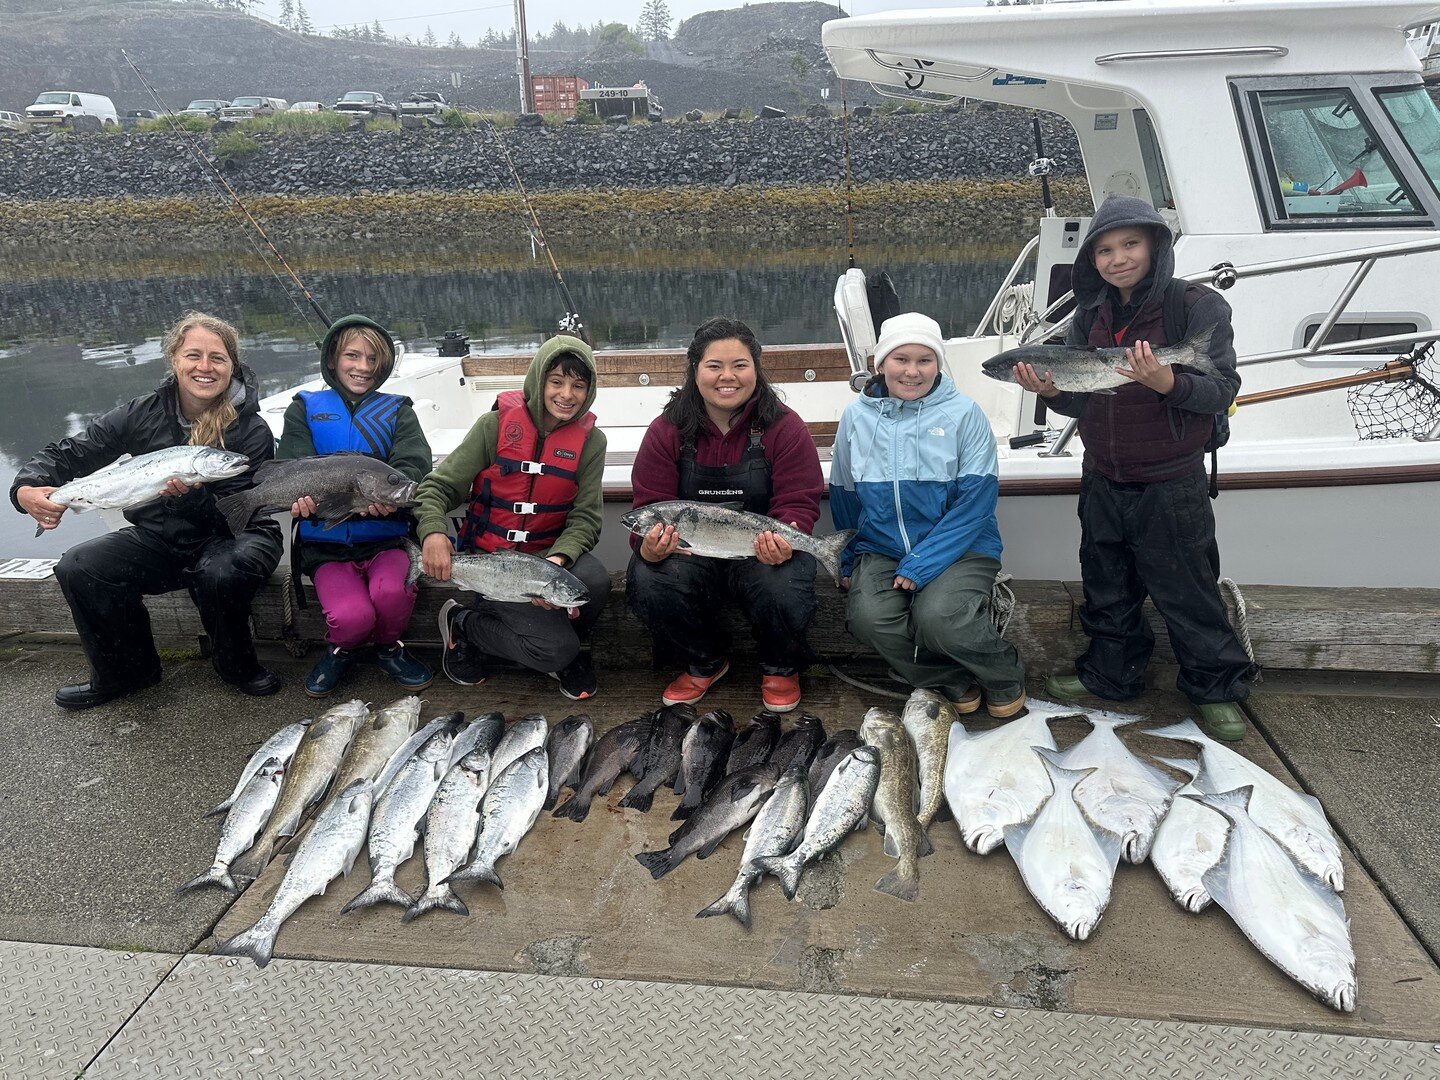 More fish 🐟🐟

The Kodaik community also held a Youth Ocean Challenge this year, focusing on topics like joy and experiencing God's love through nature.

#weareyayam